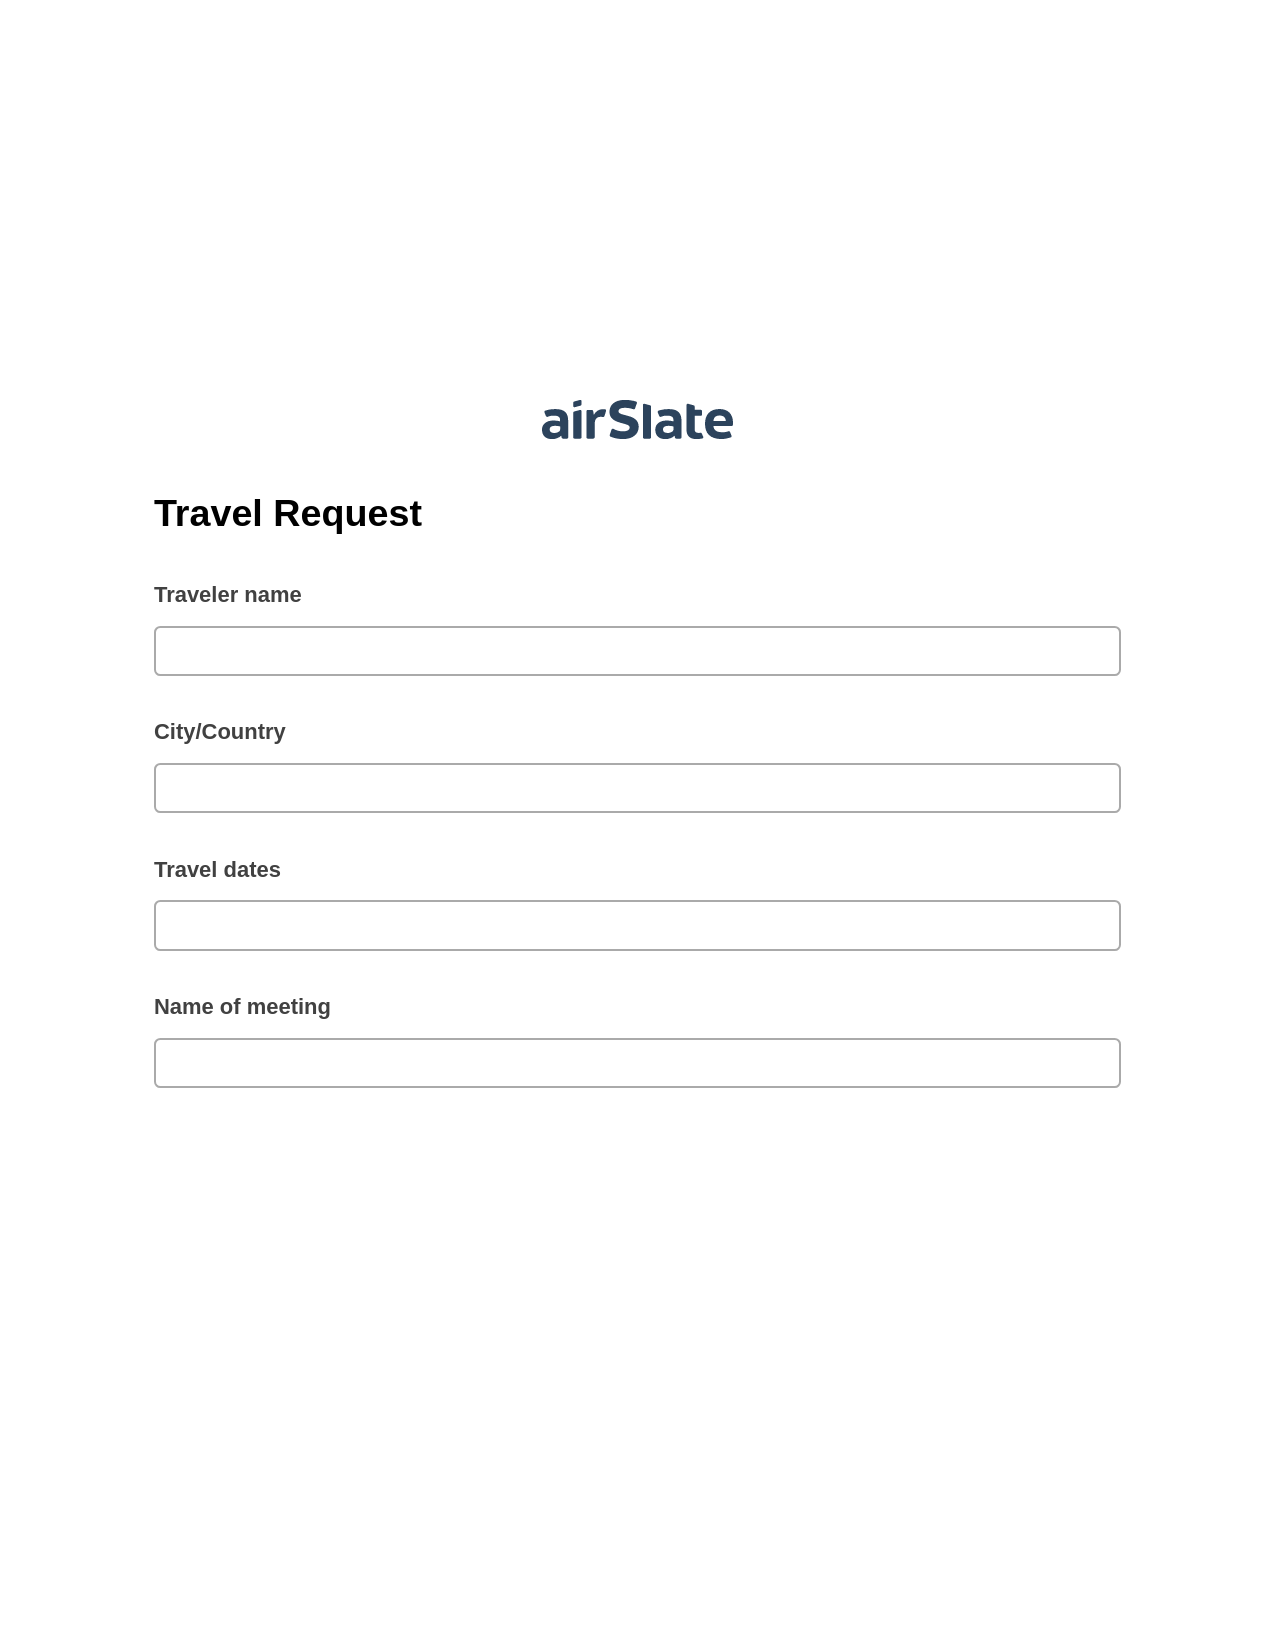 Multirole Travel Request Pre-fill Dropdown from Airtable, Create slate bot, Post-finish Document Bot